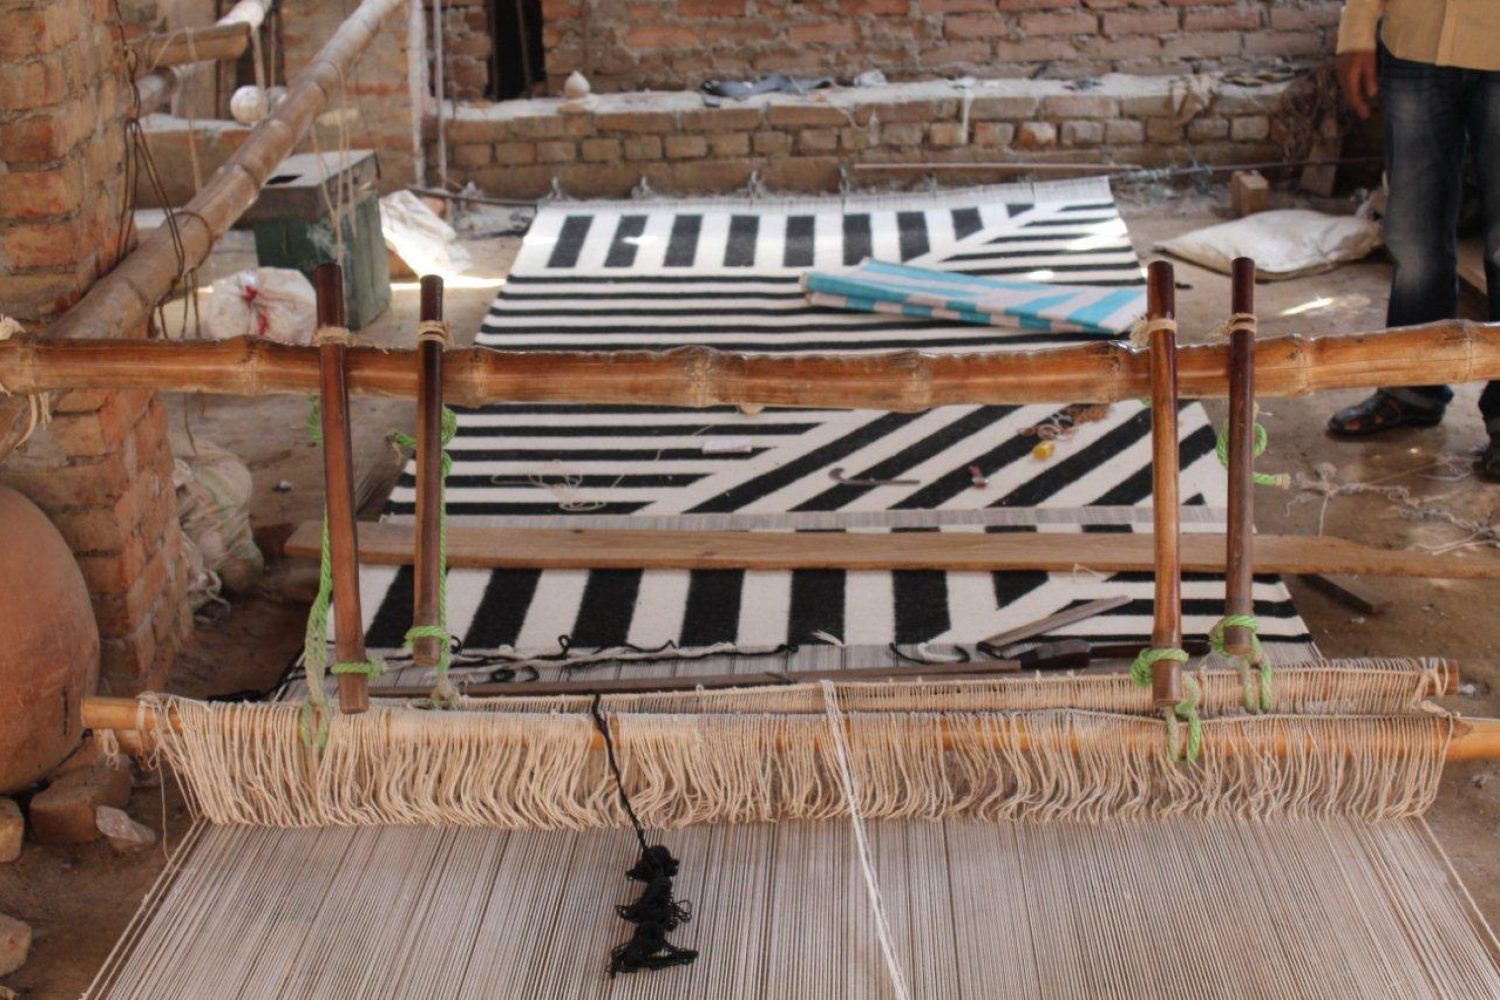 Image showing a loom which a flatwoven rug is constructed on by using traditional weaving techniques